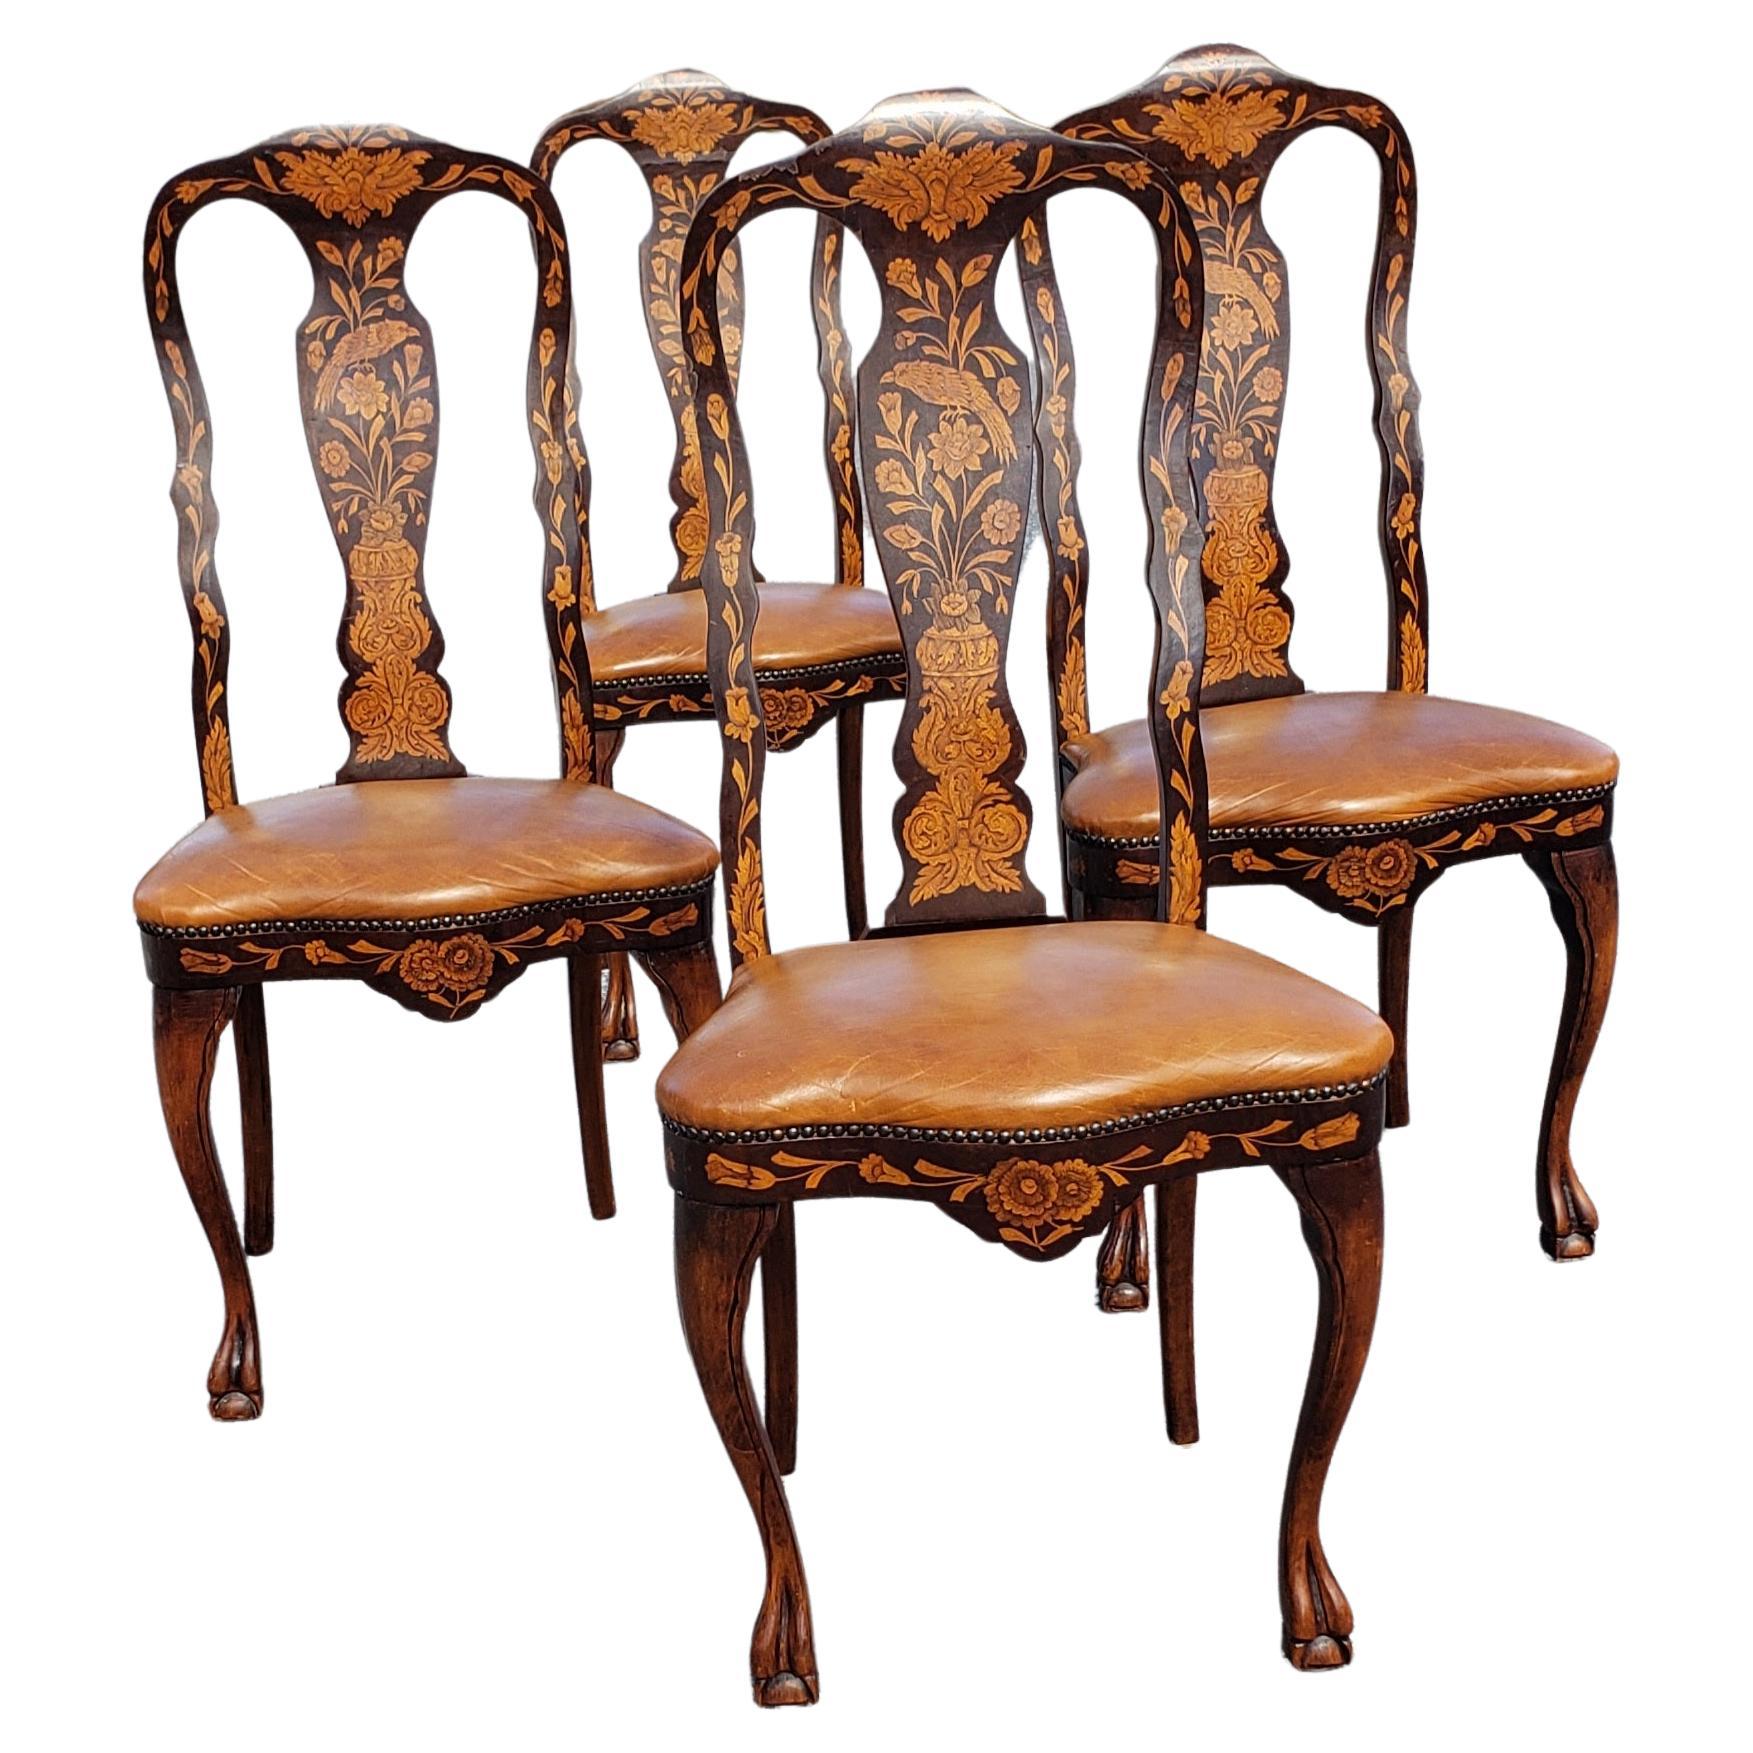 This exquisite set of four mahogany and satinwood Ducth marquetry dining chairs with top and soft grain leather seats offer a sophisticated presence for any upscale home. Newer, solft leather seats. Measures 21